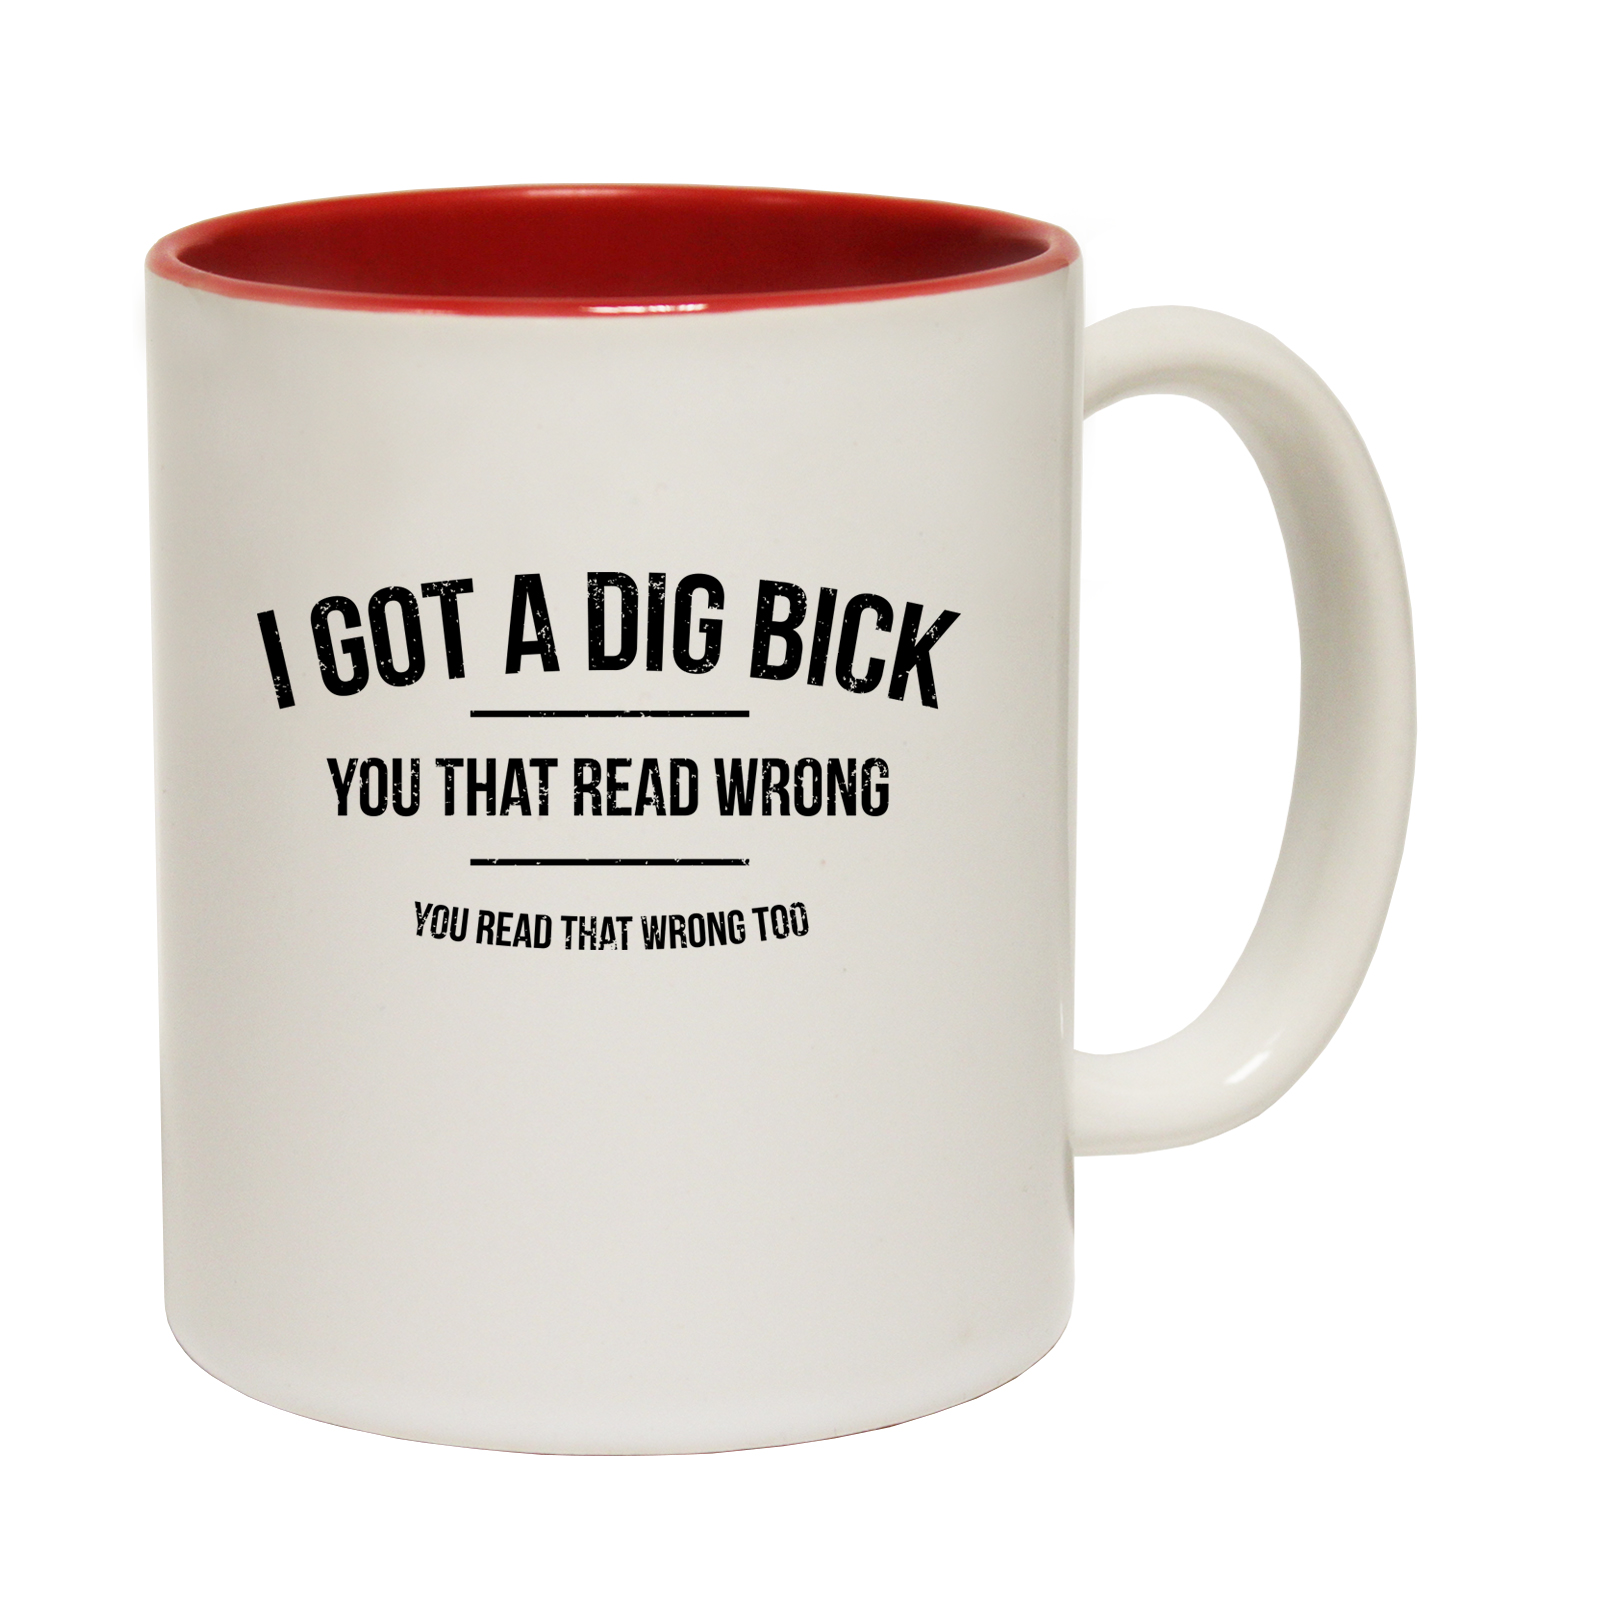 Funny Mugs I Got A Dig Bick Offensive Adult Humour Rude Cheeky